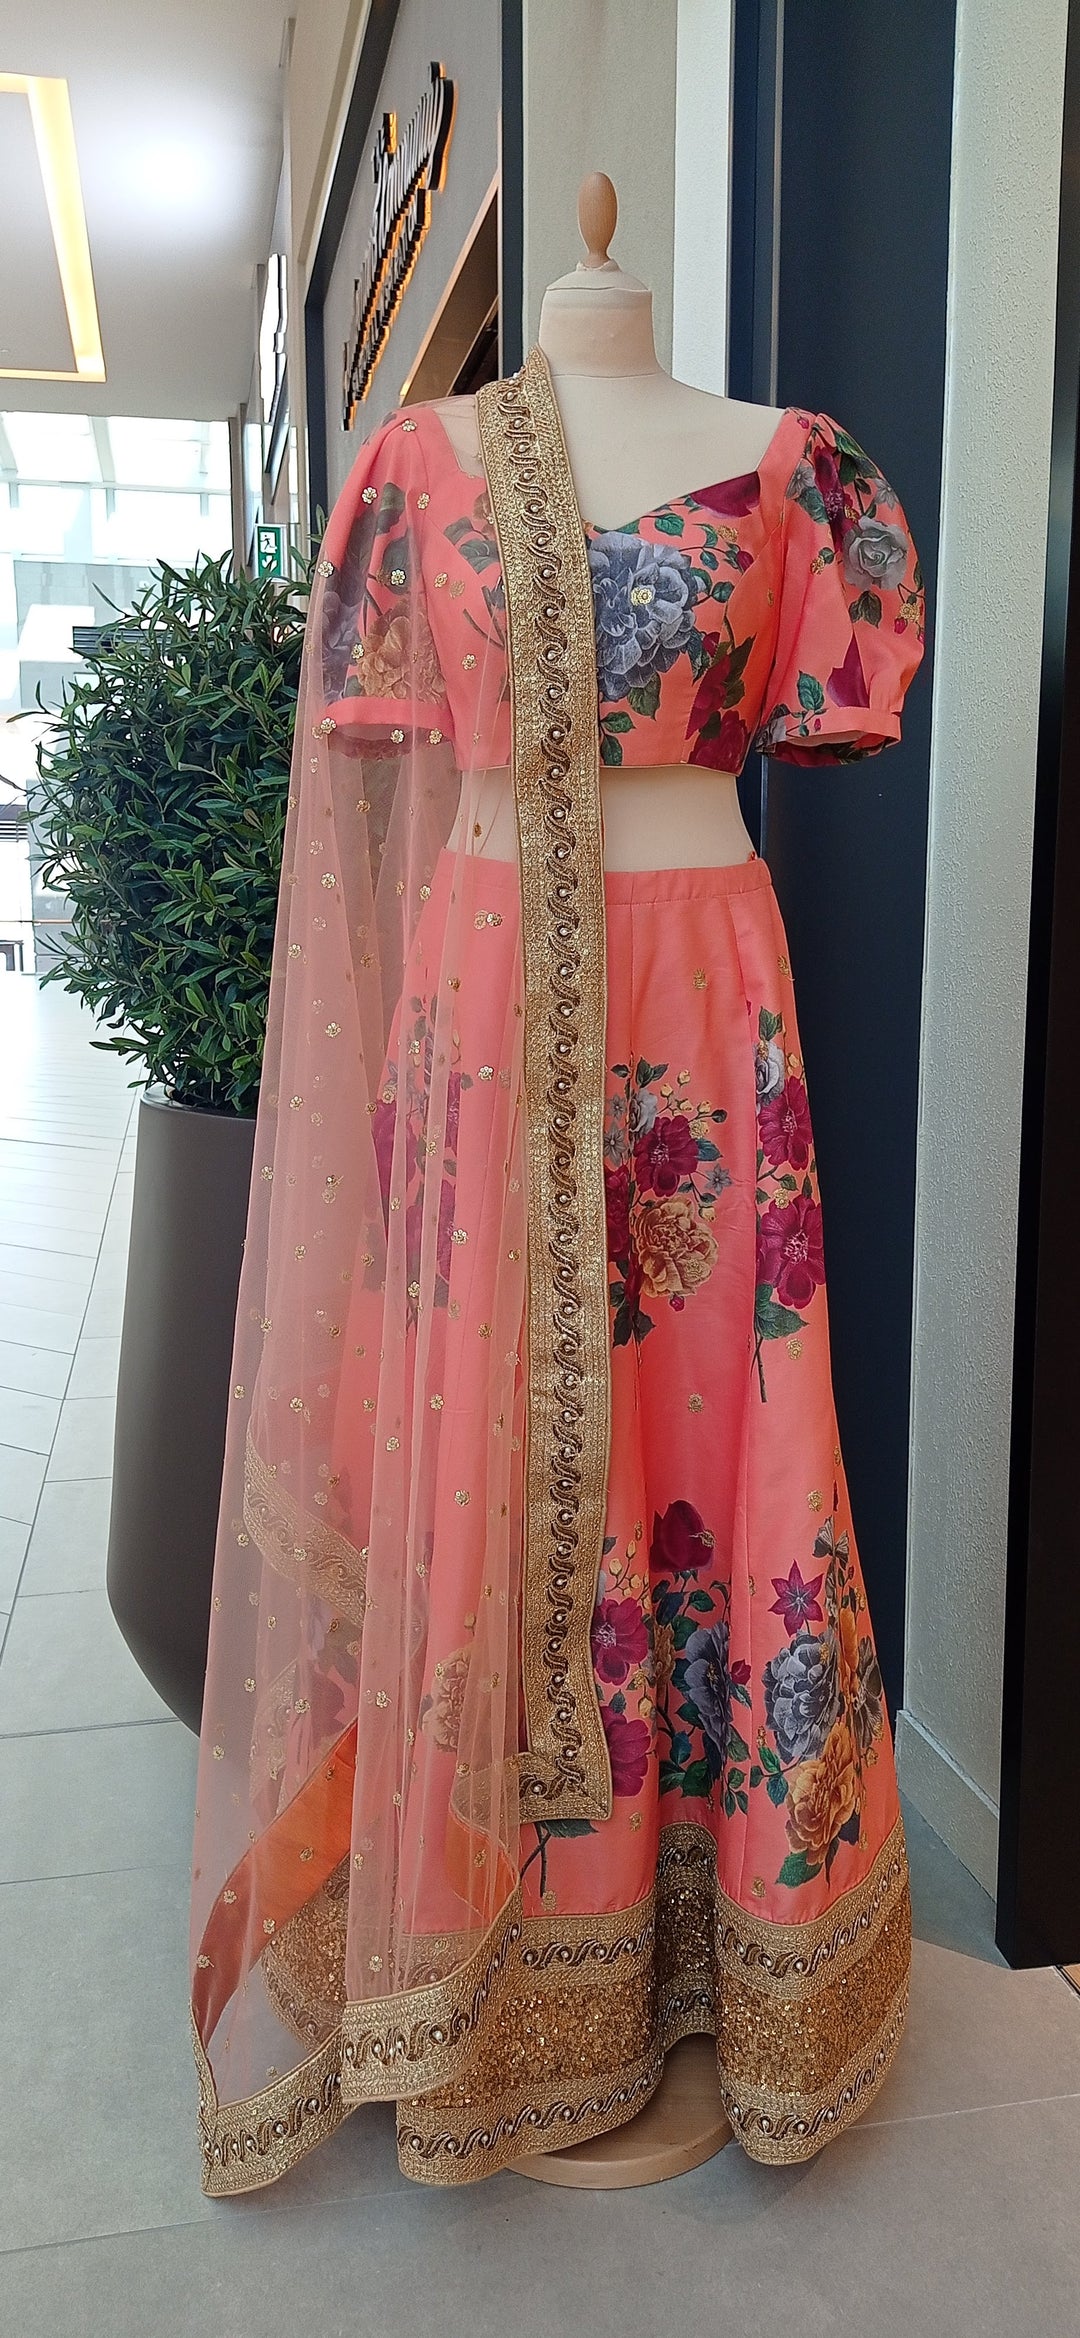 Flora Neon Orange Lehenga with Printed Florals and a Gold Sequins Border (Ready-to-Wear)